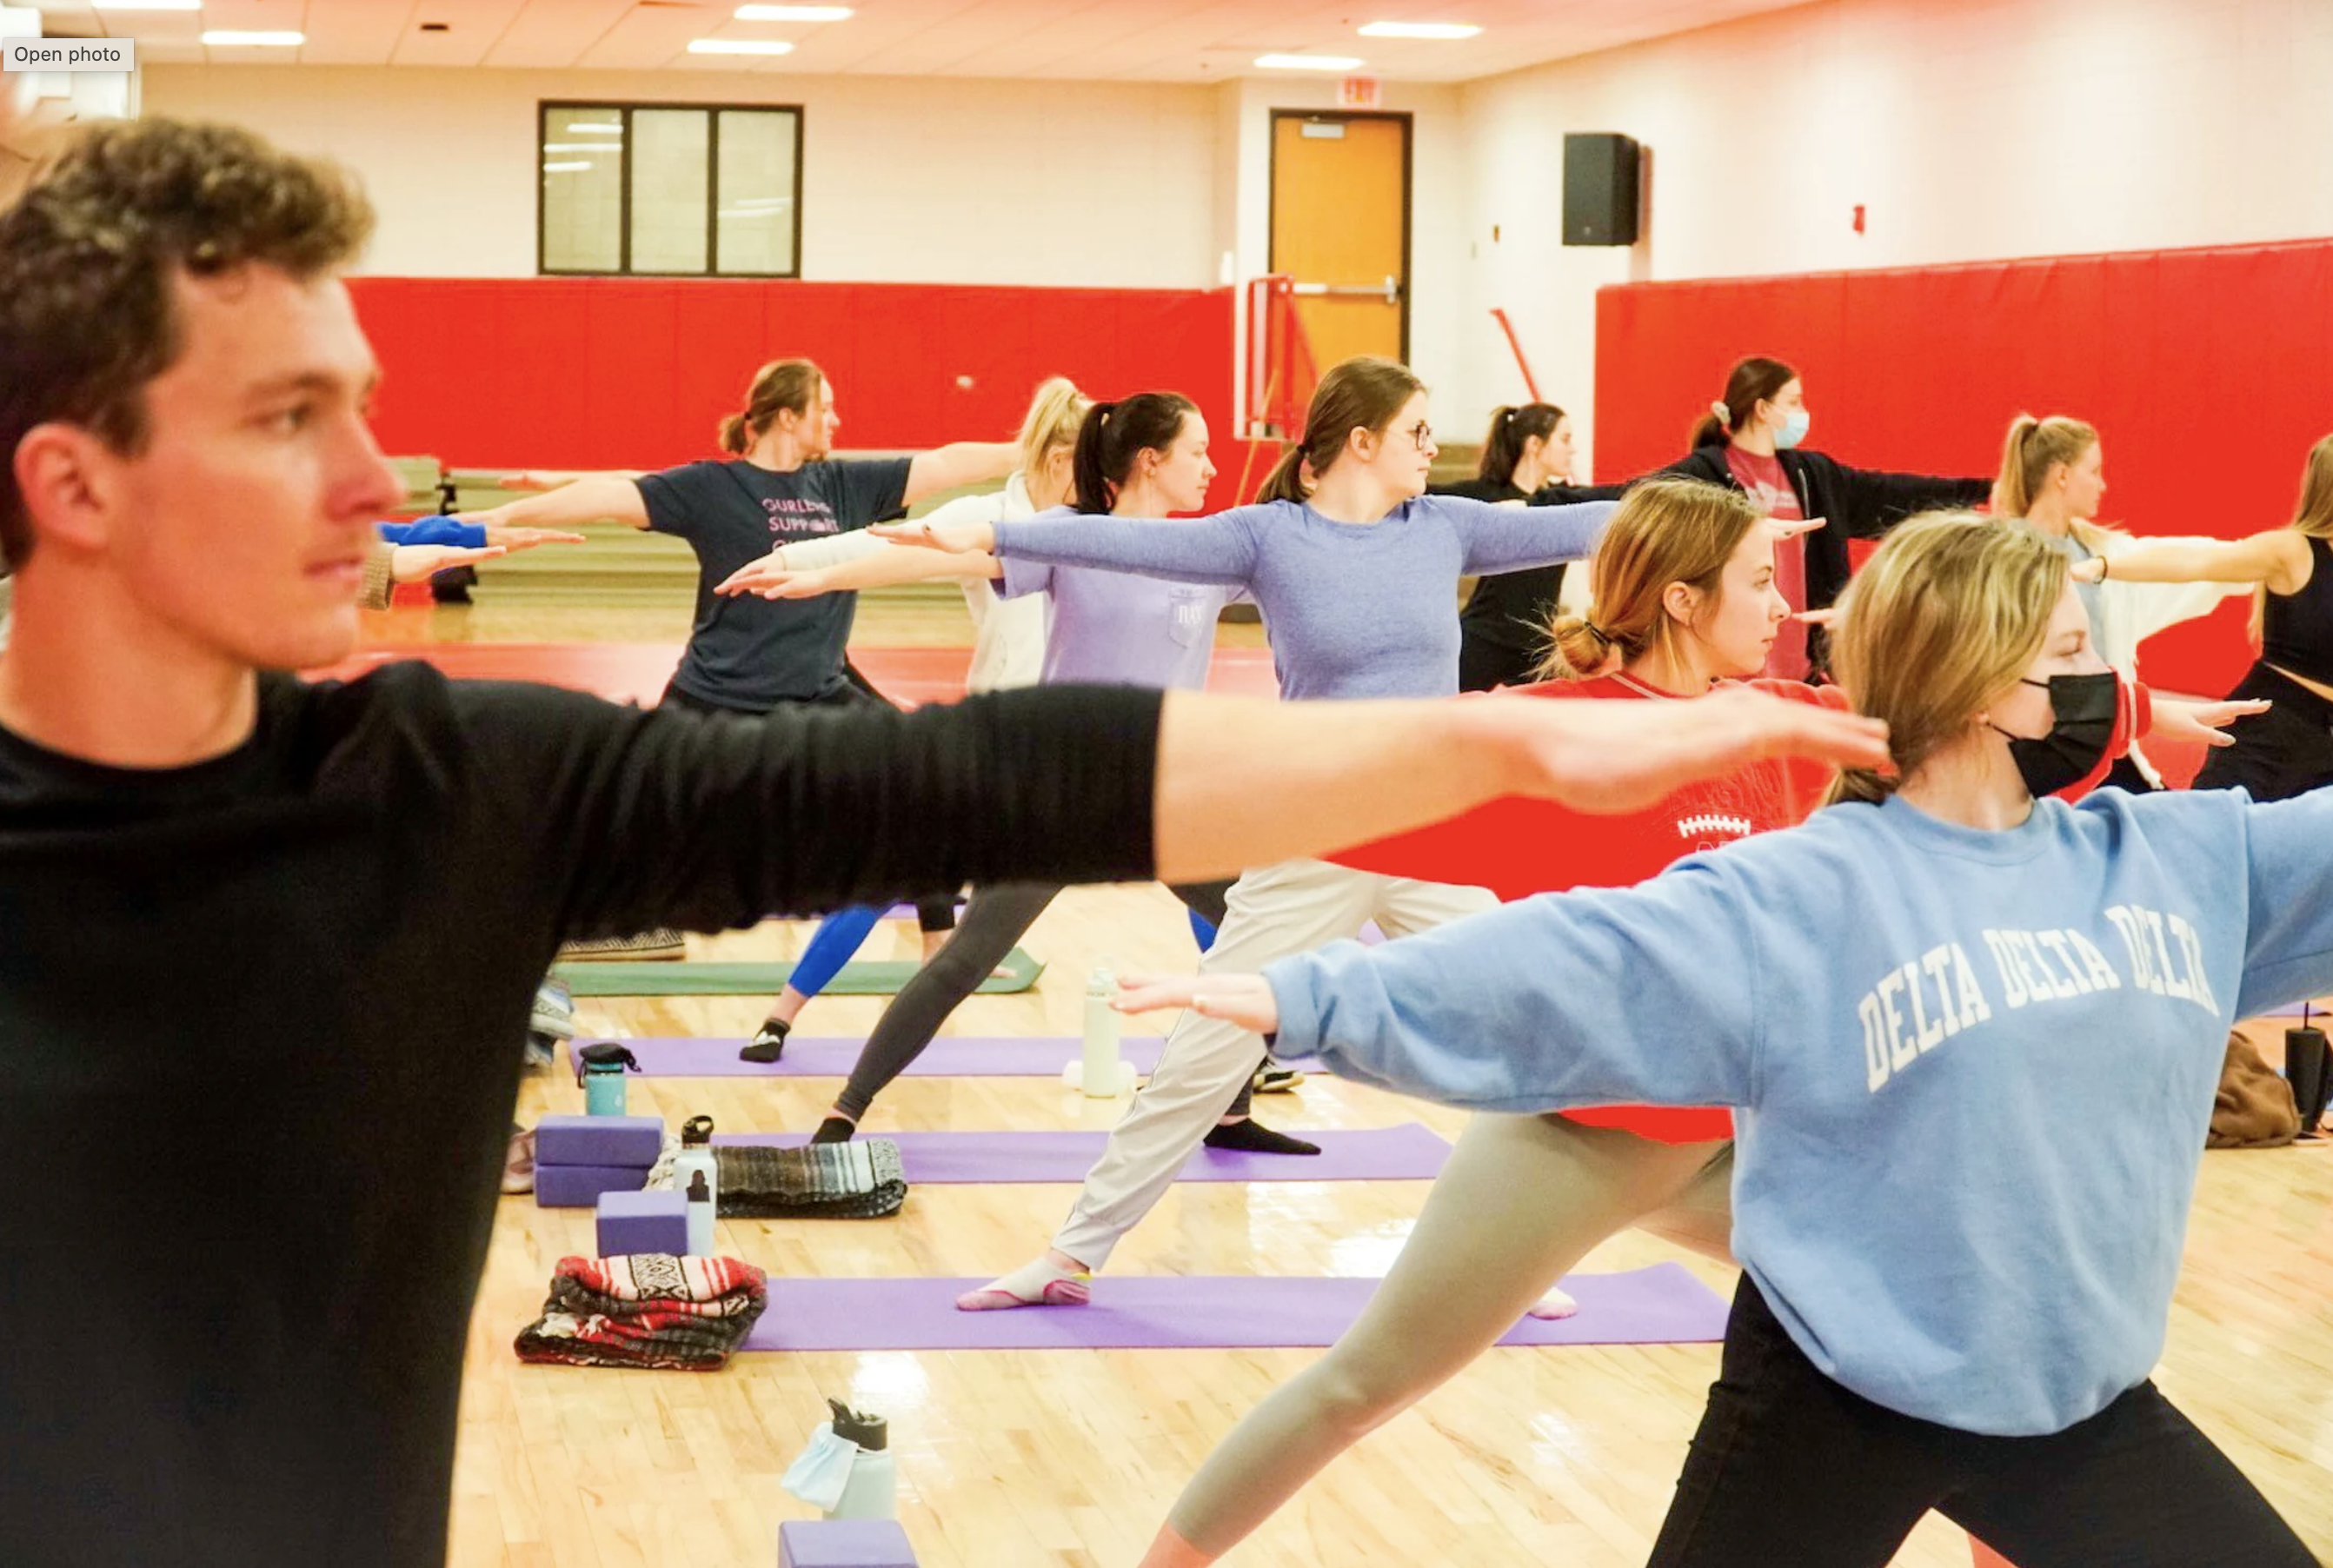 Students participate in a guided group yoga and meditation practice in the Campus Recreation Center Fitness Room.